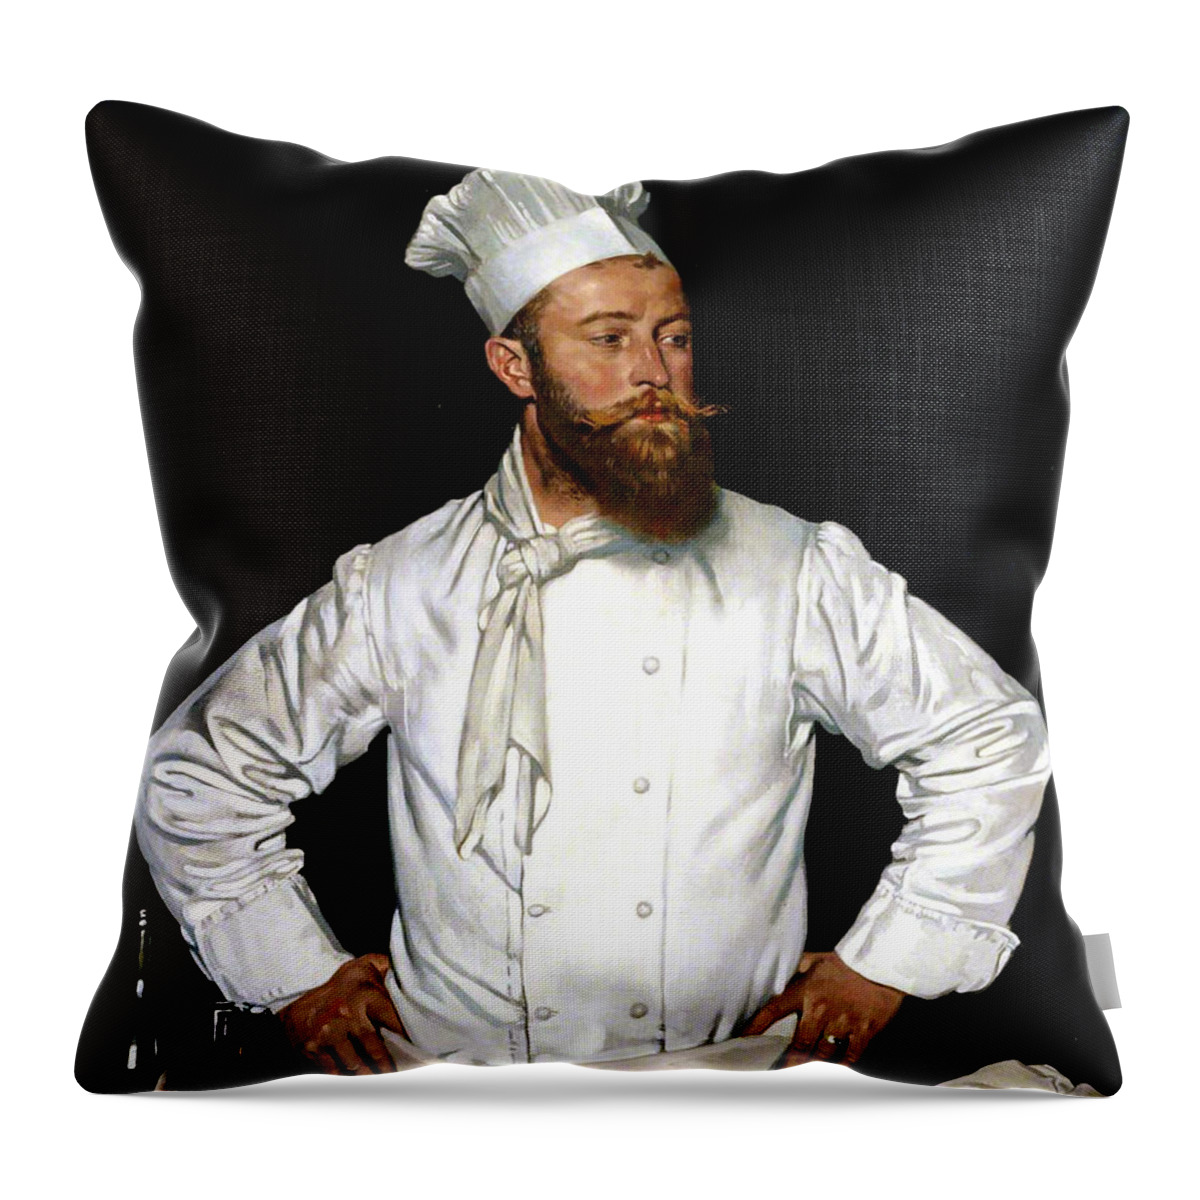 Irish Art Throw Pillow featuring the painting Le Chef de l'Hotel Chatham by William Orpen